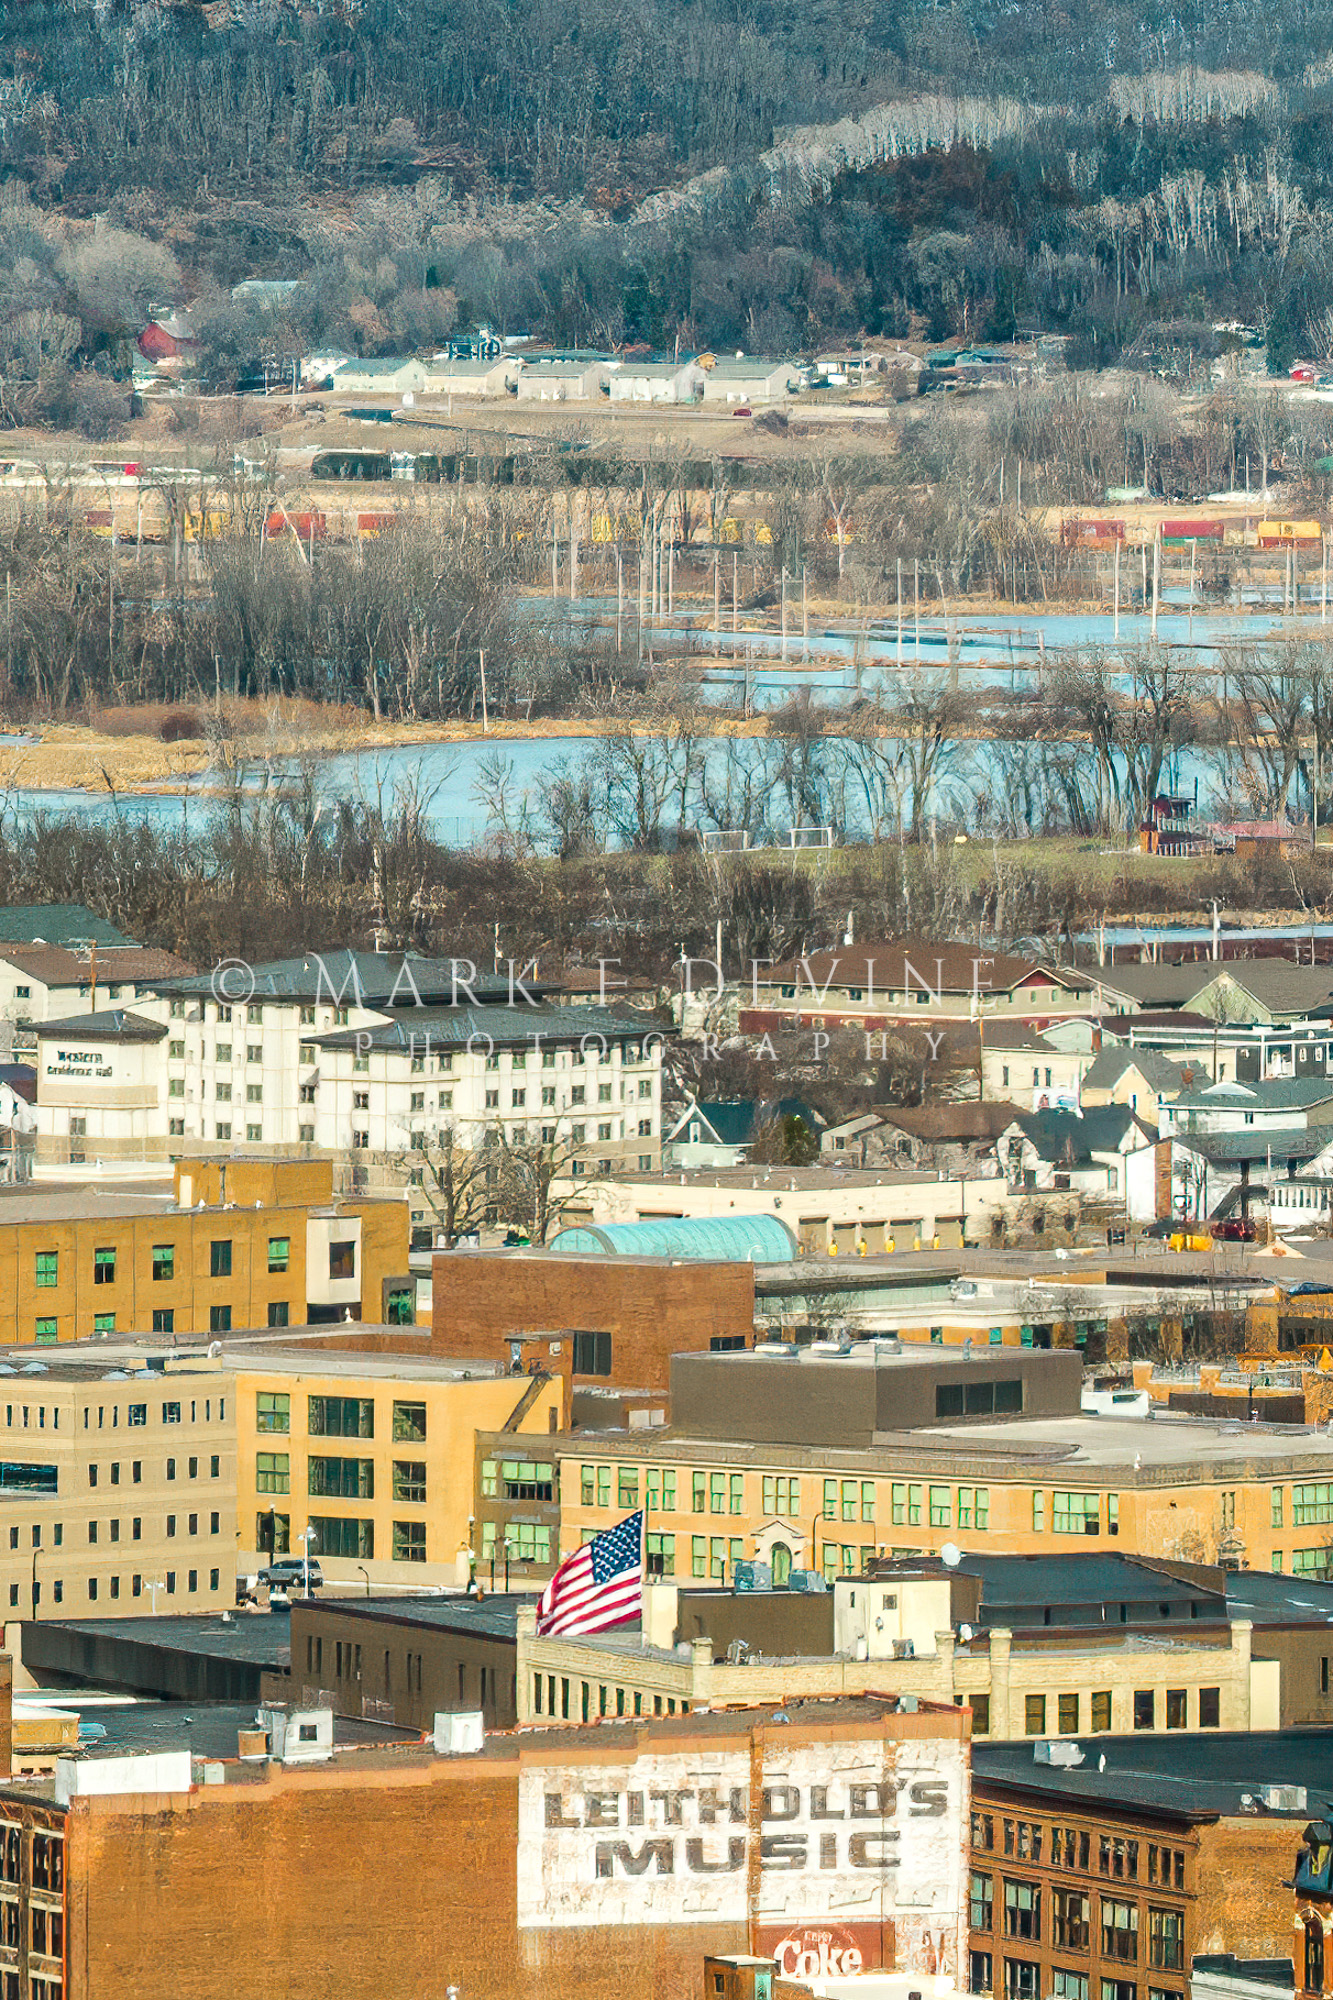 Crop from the actual full panorama. View is across downtown La Crosse northeast towards Highway 16. Bluffs in the distance are...